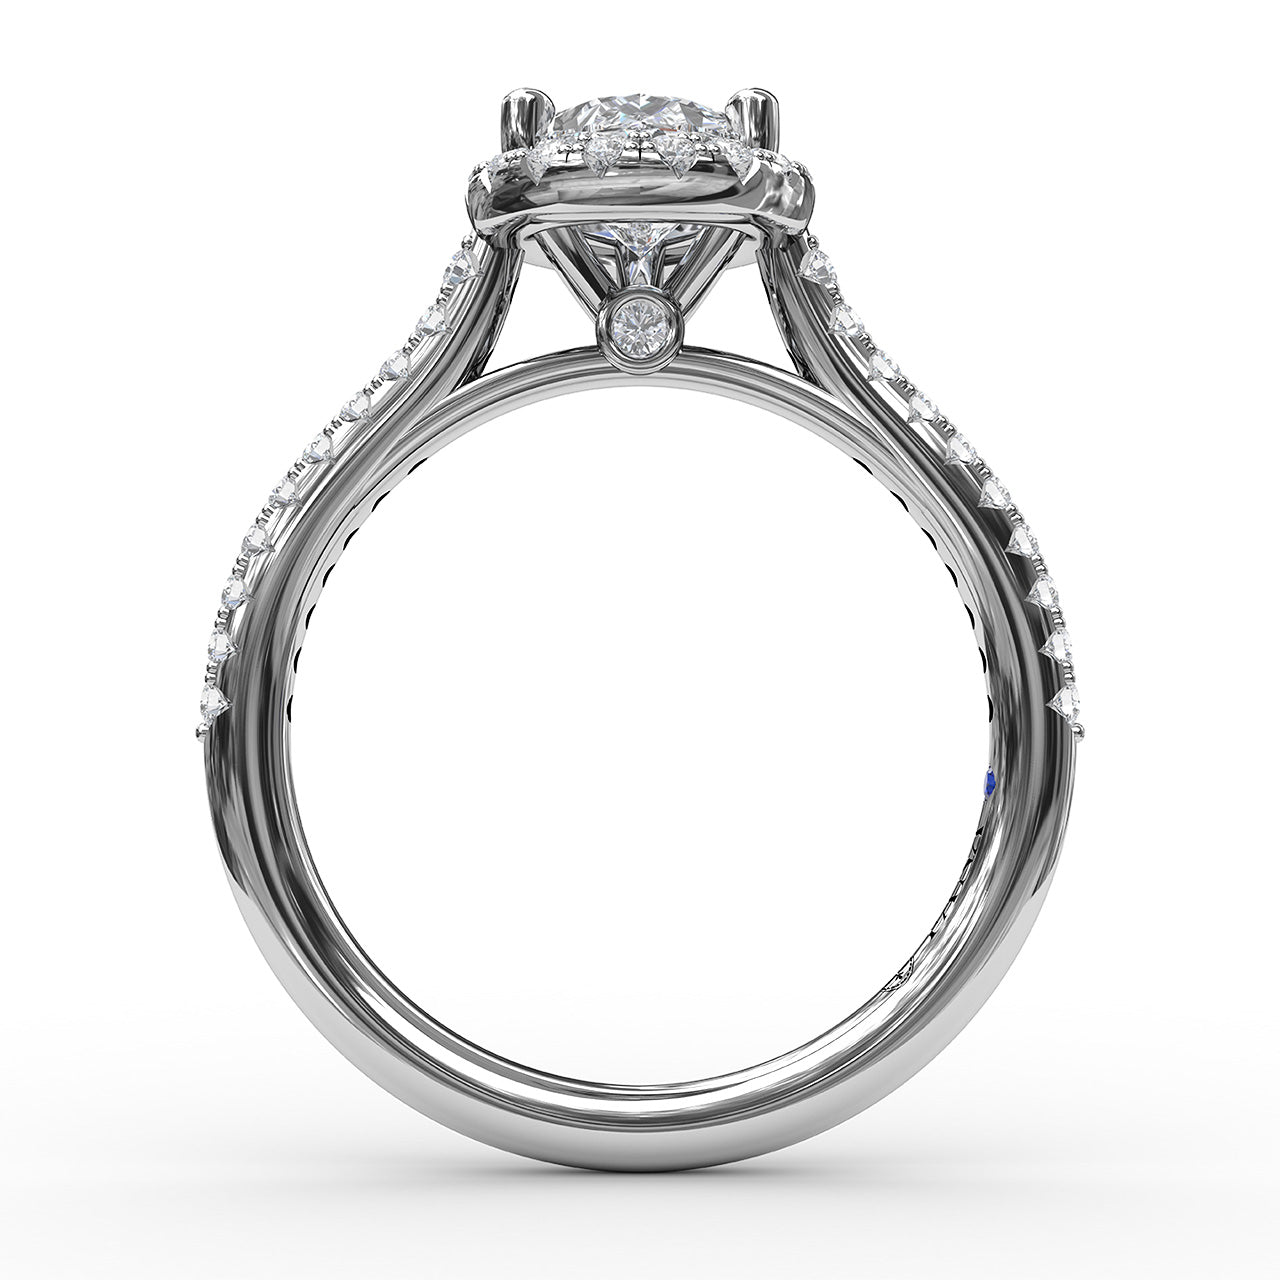 Delicate Pear Shaped Halo And Pave Band Engagement Ring